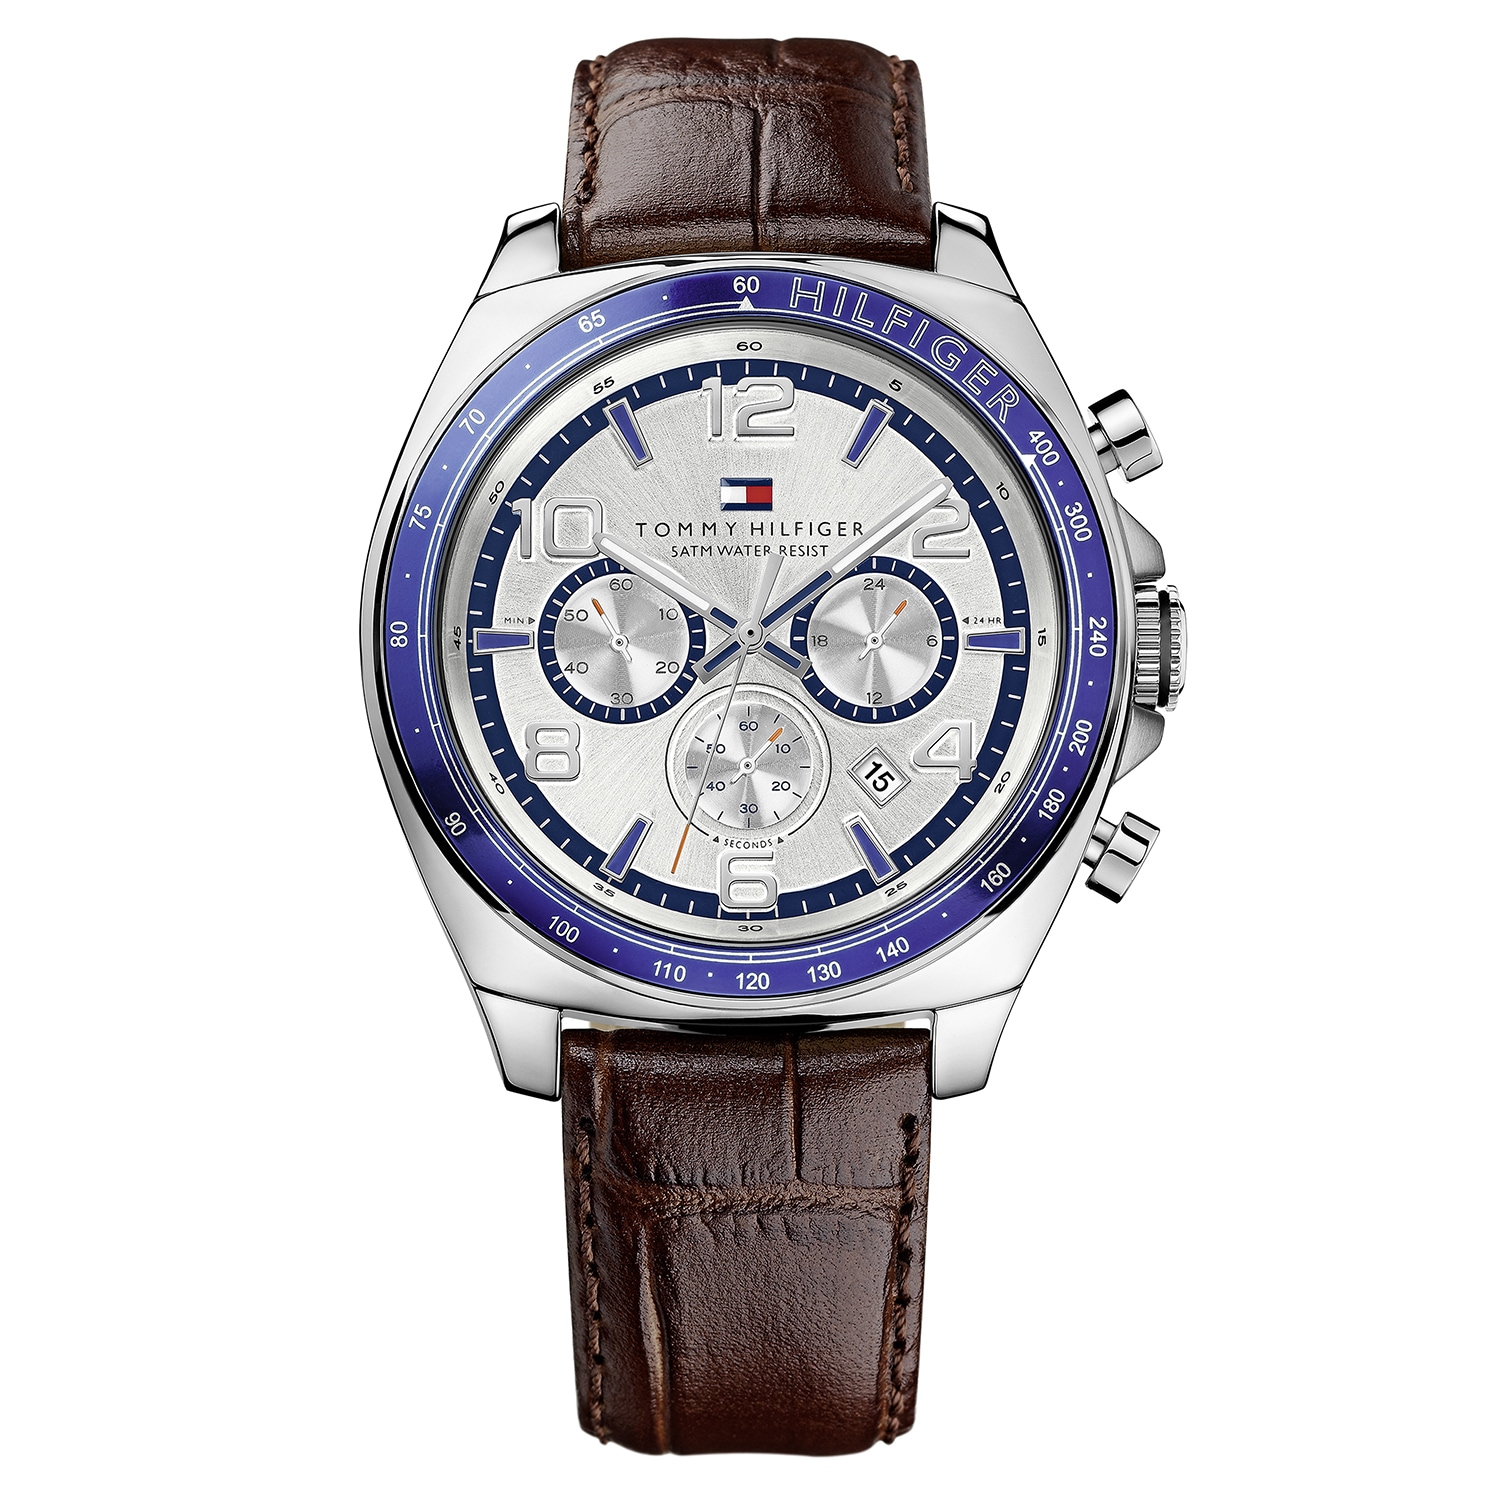 tommy hilfiger watch battery cost